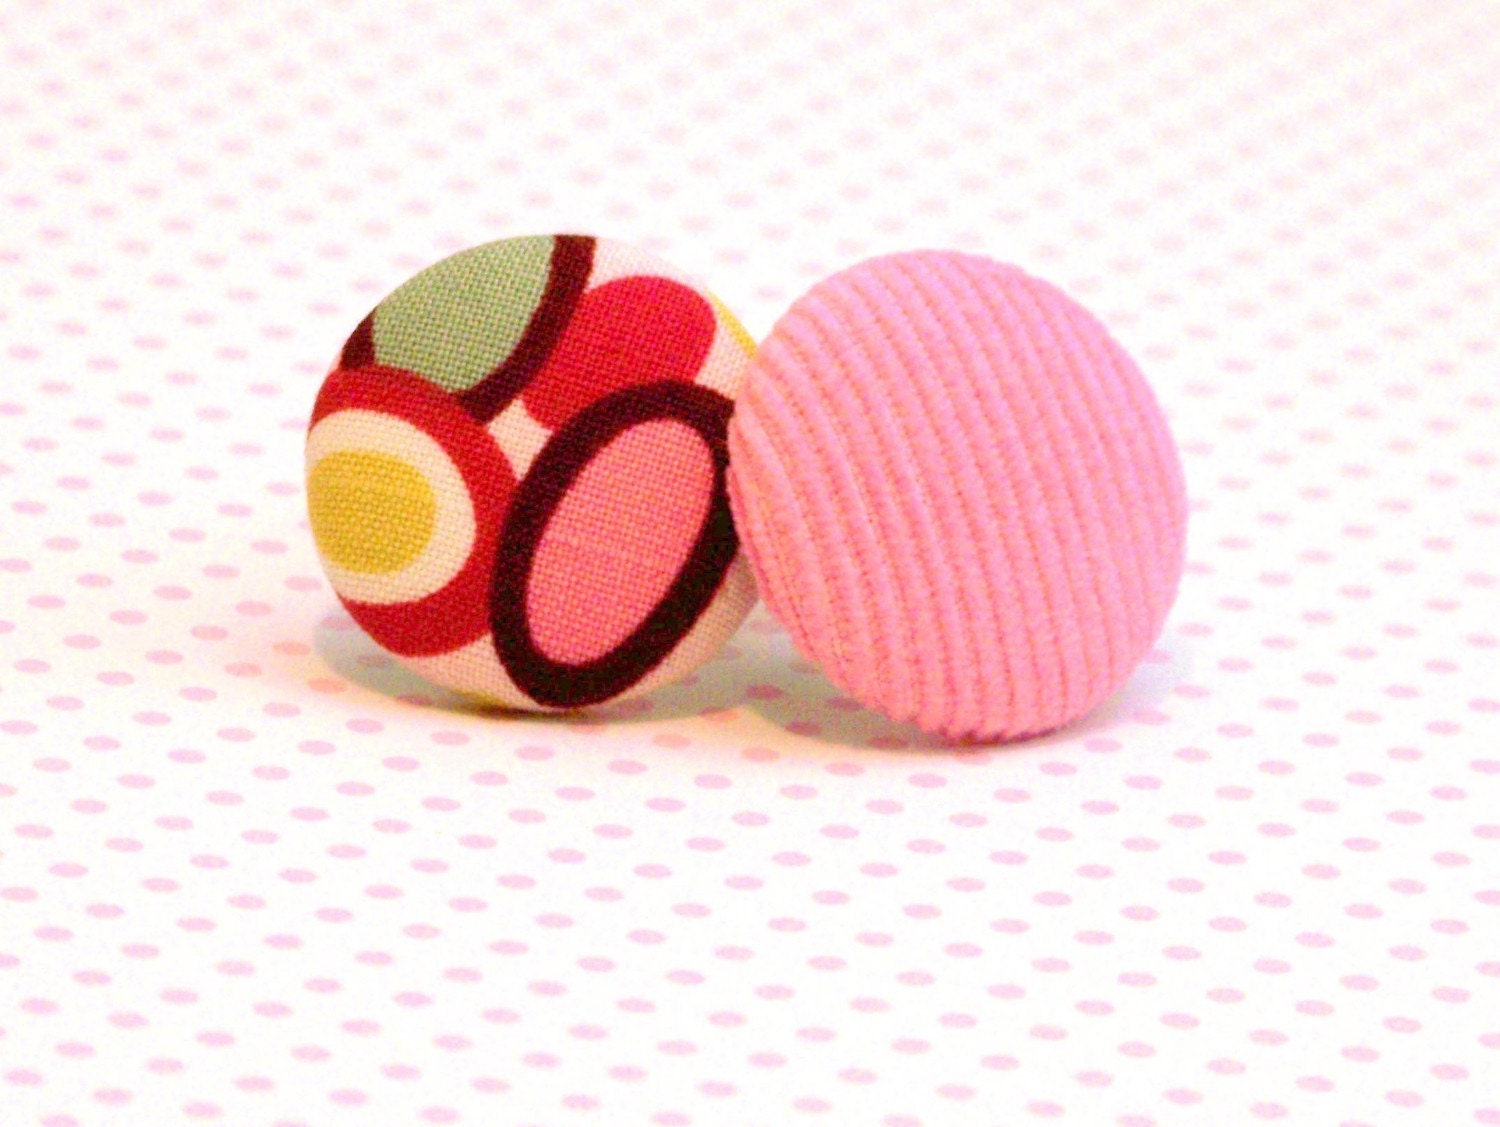 ponytail holders for girls. Childrens Girls Petite Ponytail Holders - Mod Pink Dots. From SugarChicBaby